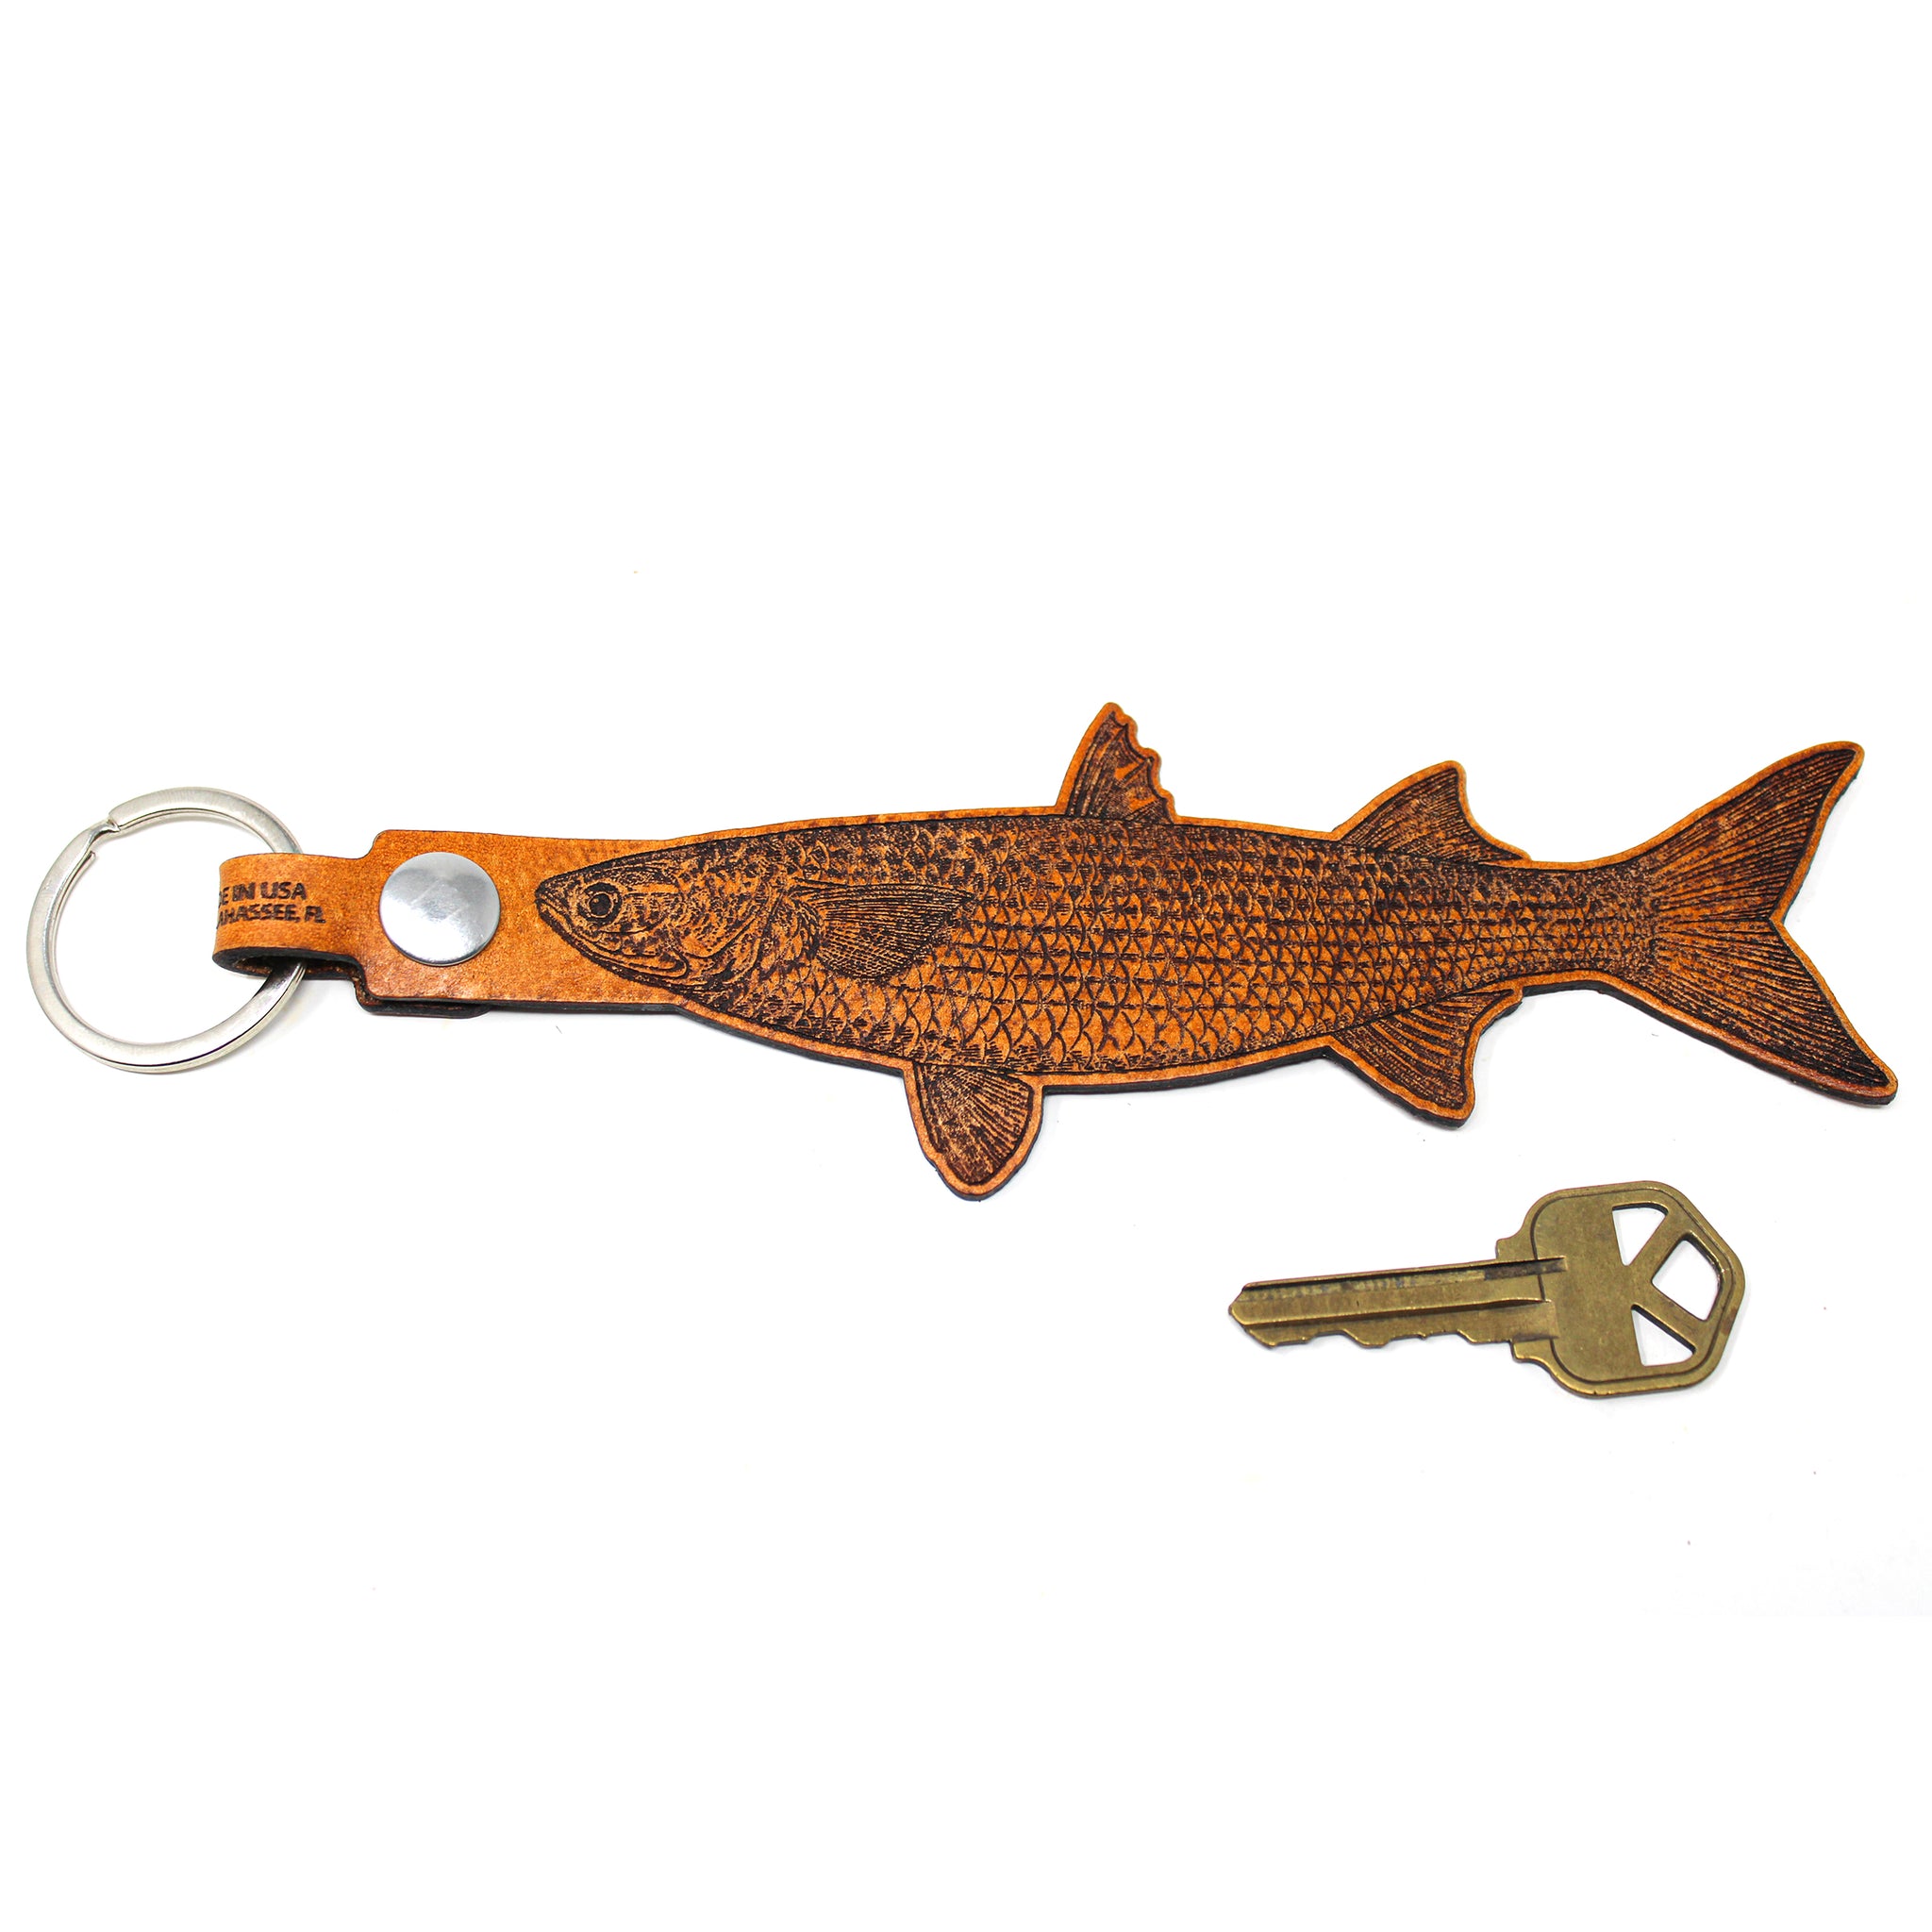 Leather Keychain - Large Mullet Keychain